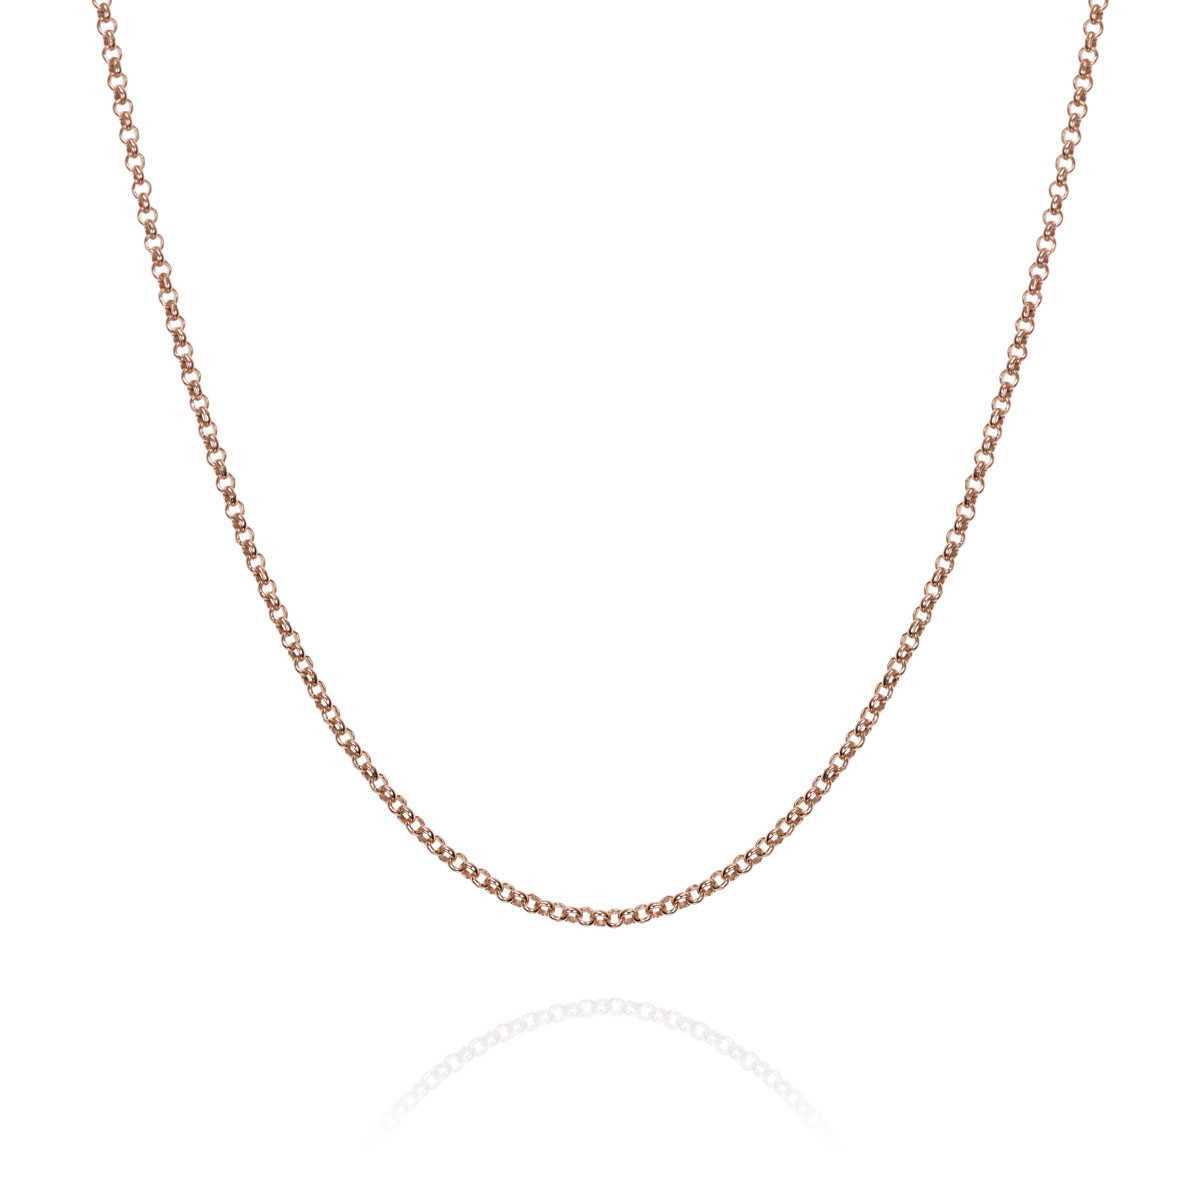 Chain in Silver 45 cm. Rose Gold